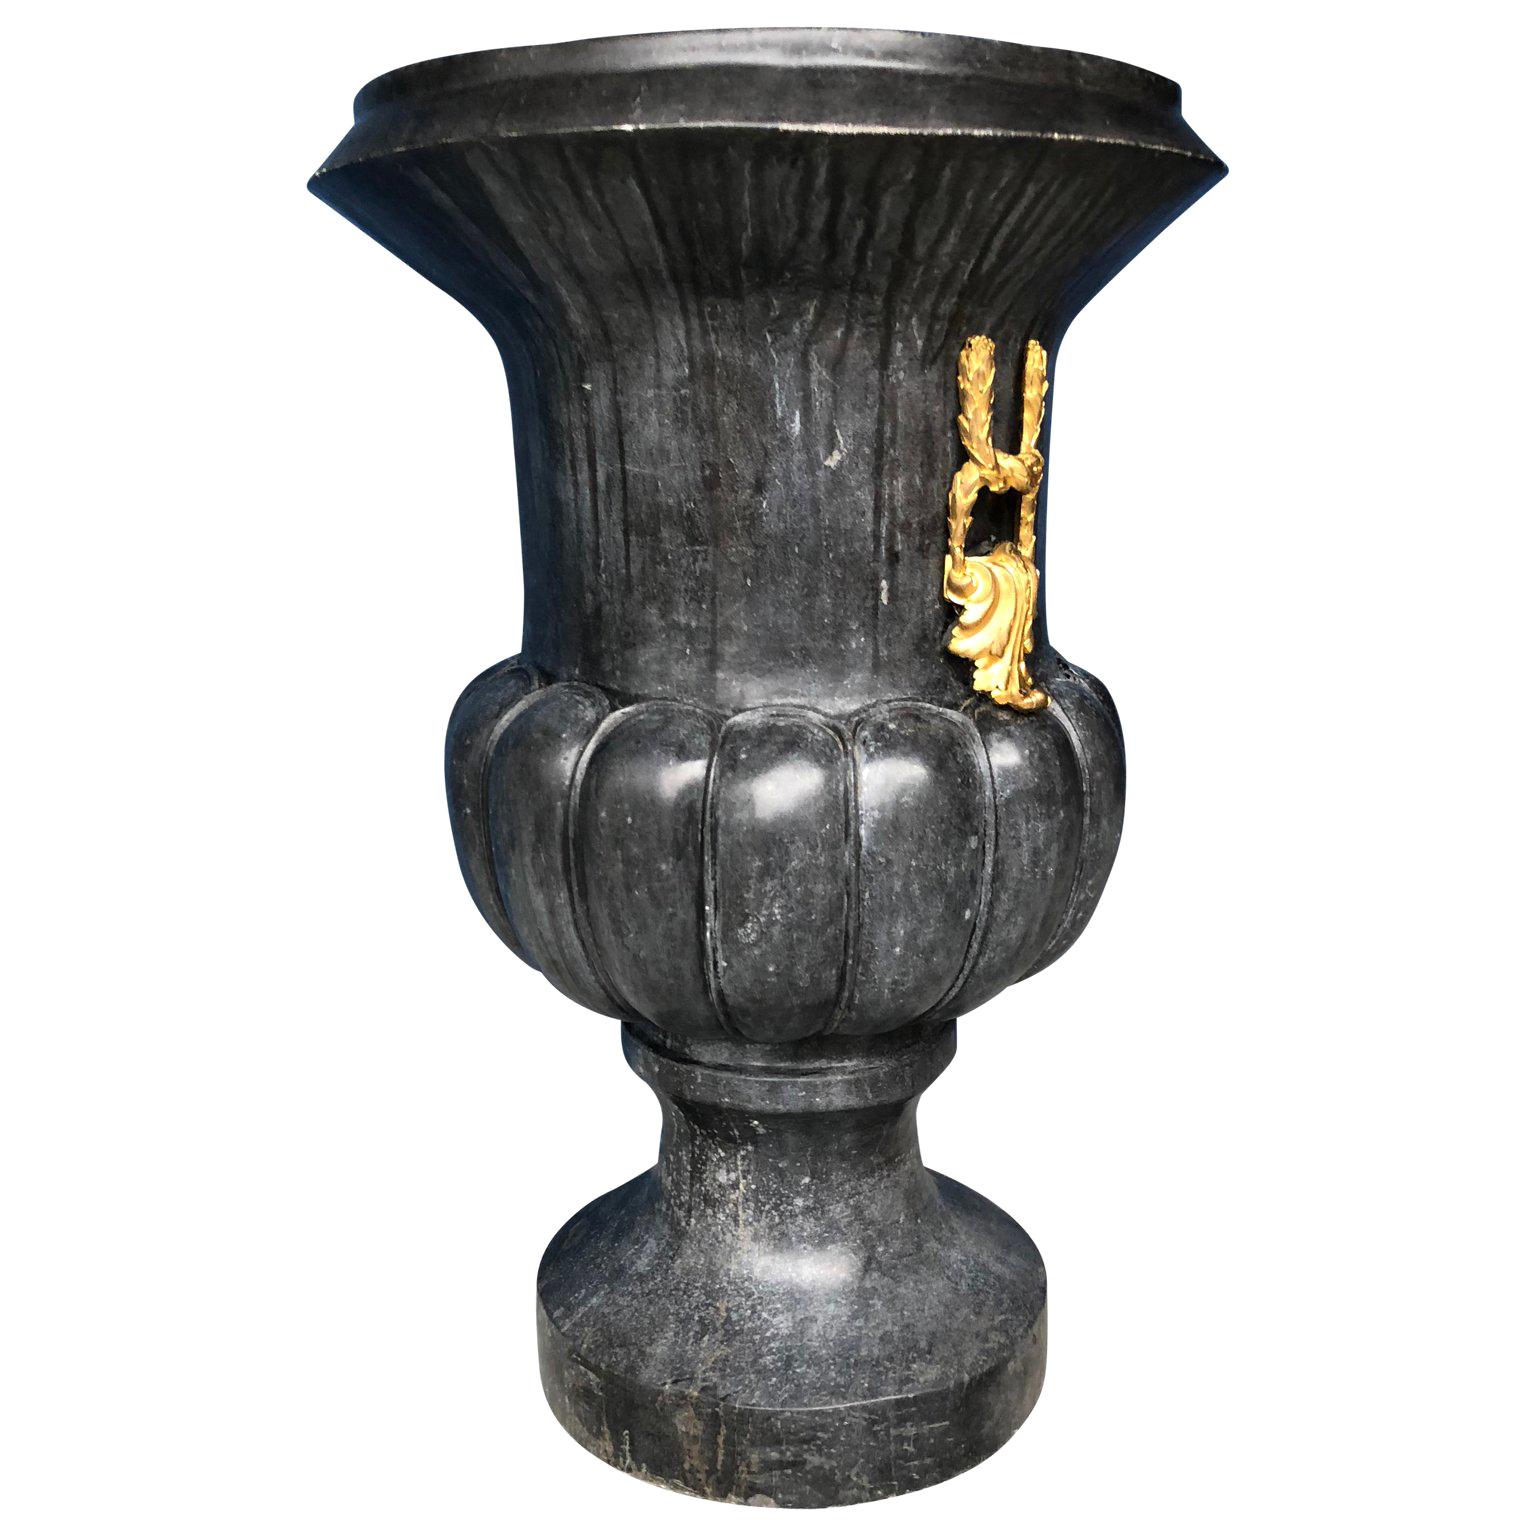 Large Italian 19th century black marble bulbous urn with ormolu gilded hardware

Large Italian hand carved marble urn. The main body is carved in thick wide bulbous marble, a marble that has a variety of black charcoal shades, see detailed